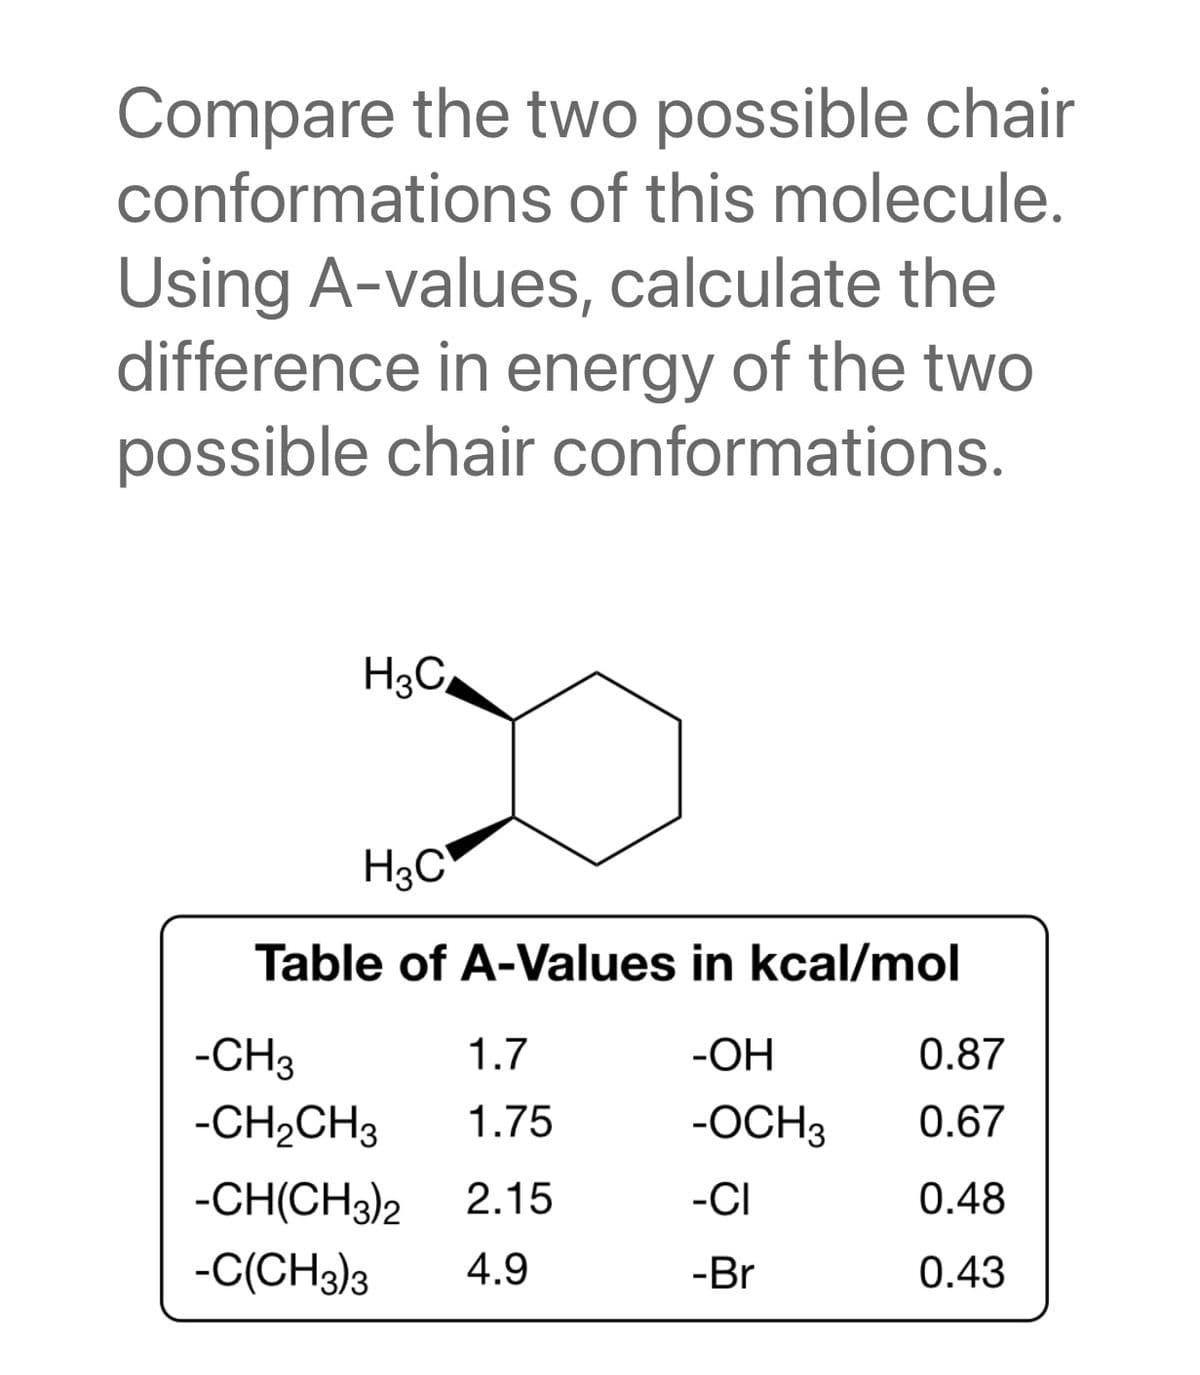 Compare the two possible chair
conformations of this molecule.
Using A-values, calculate the
difference in energy of the two
possible chair conformations.
H3C
H3C
Table of A-Values in kcal/mol
-CH3
1.7
-ОН
0.87
-CH2CH3
1.75
-OCH3
0.67
-CH(CH3)2
2.15
-CI
0.48
-C(CH3)3
4.9
-Br
0.43
